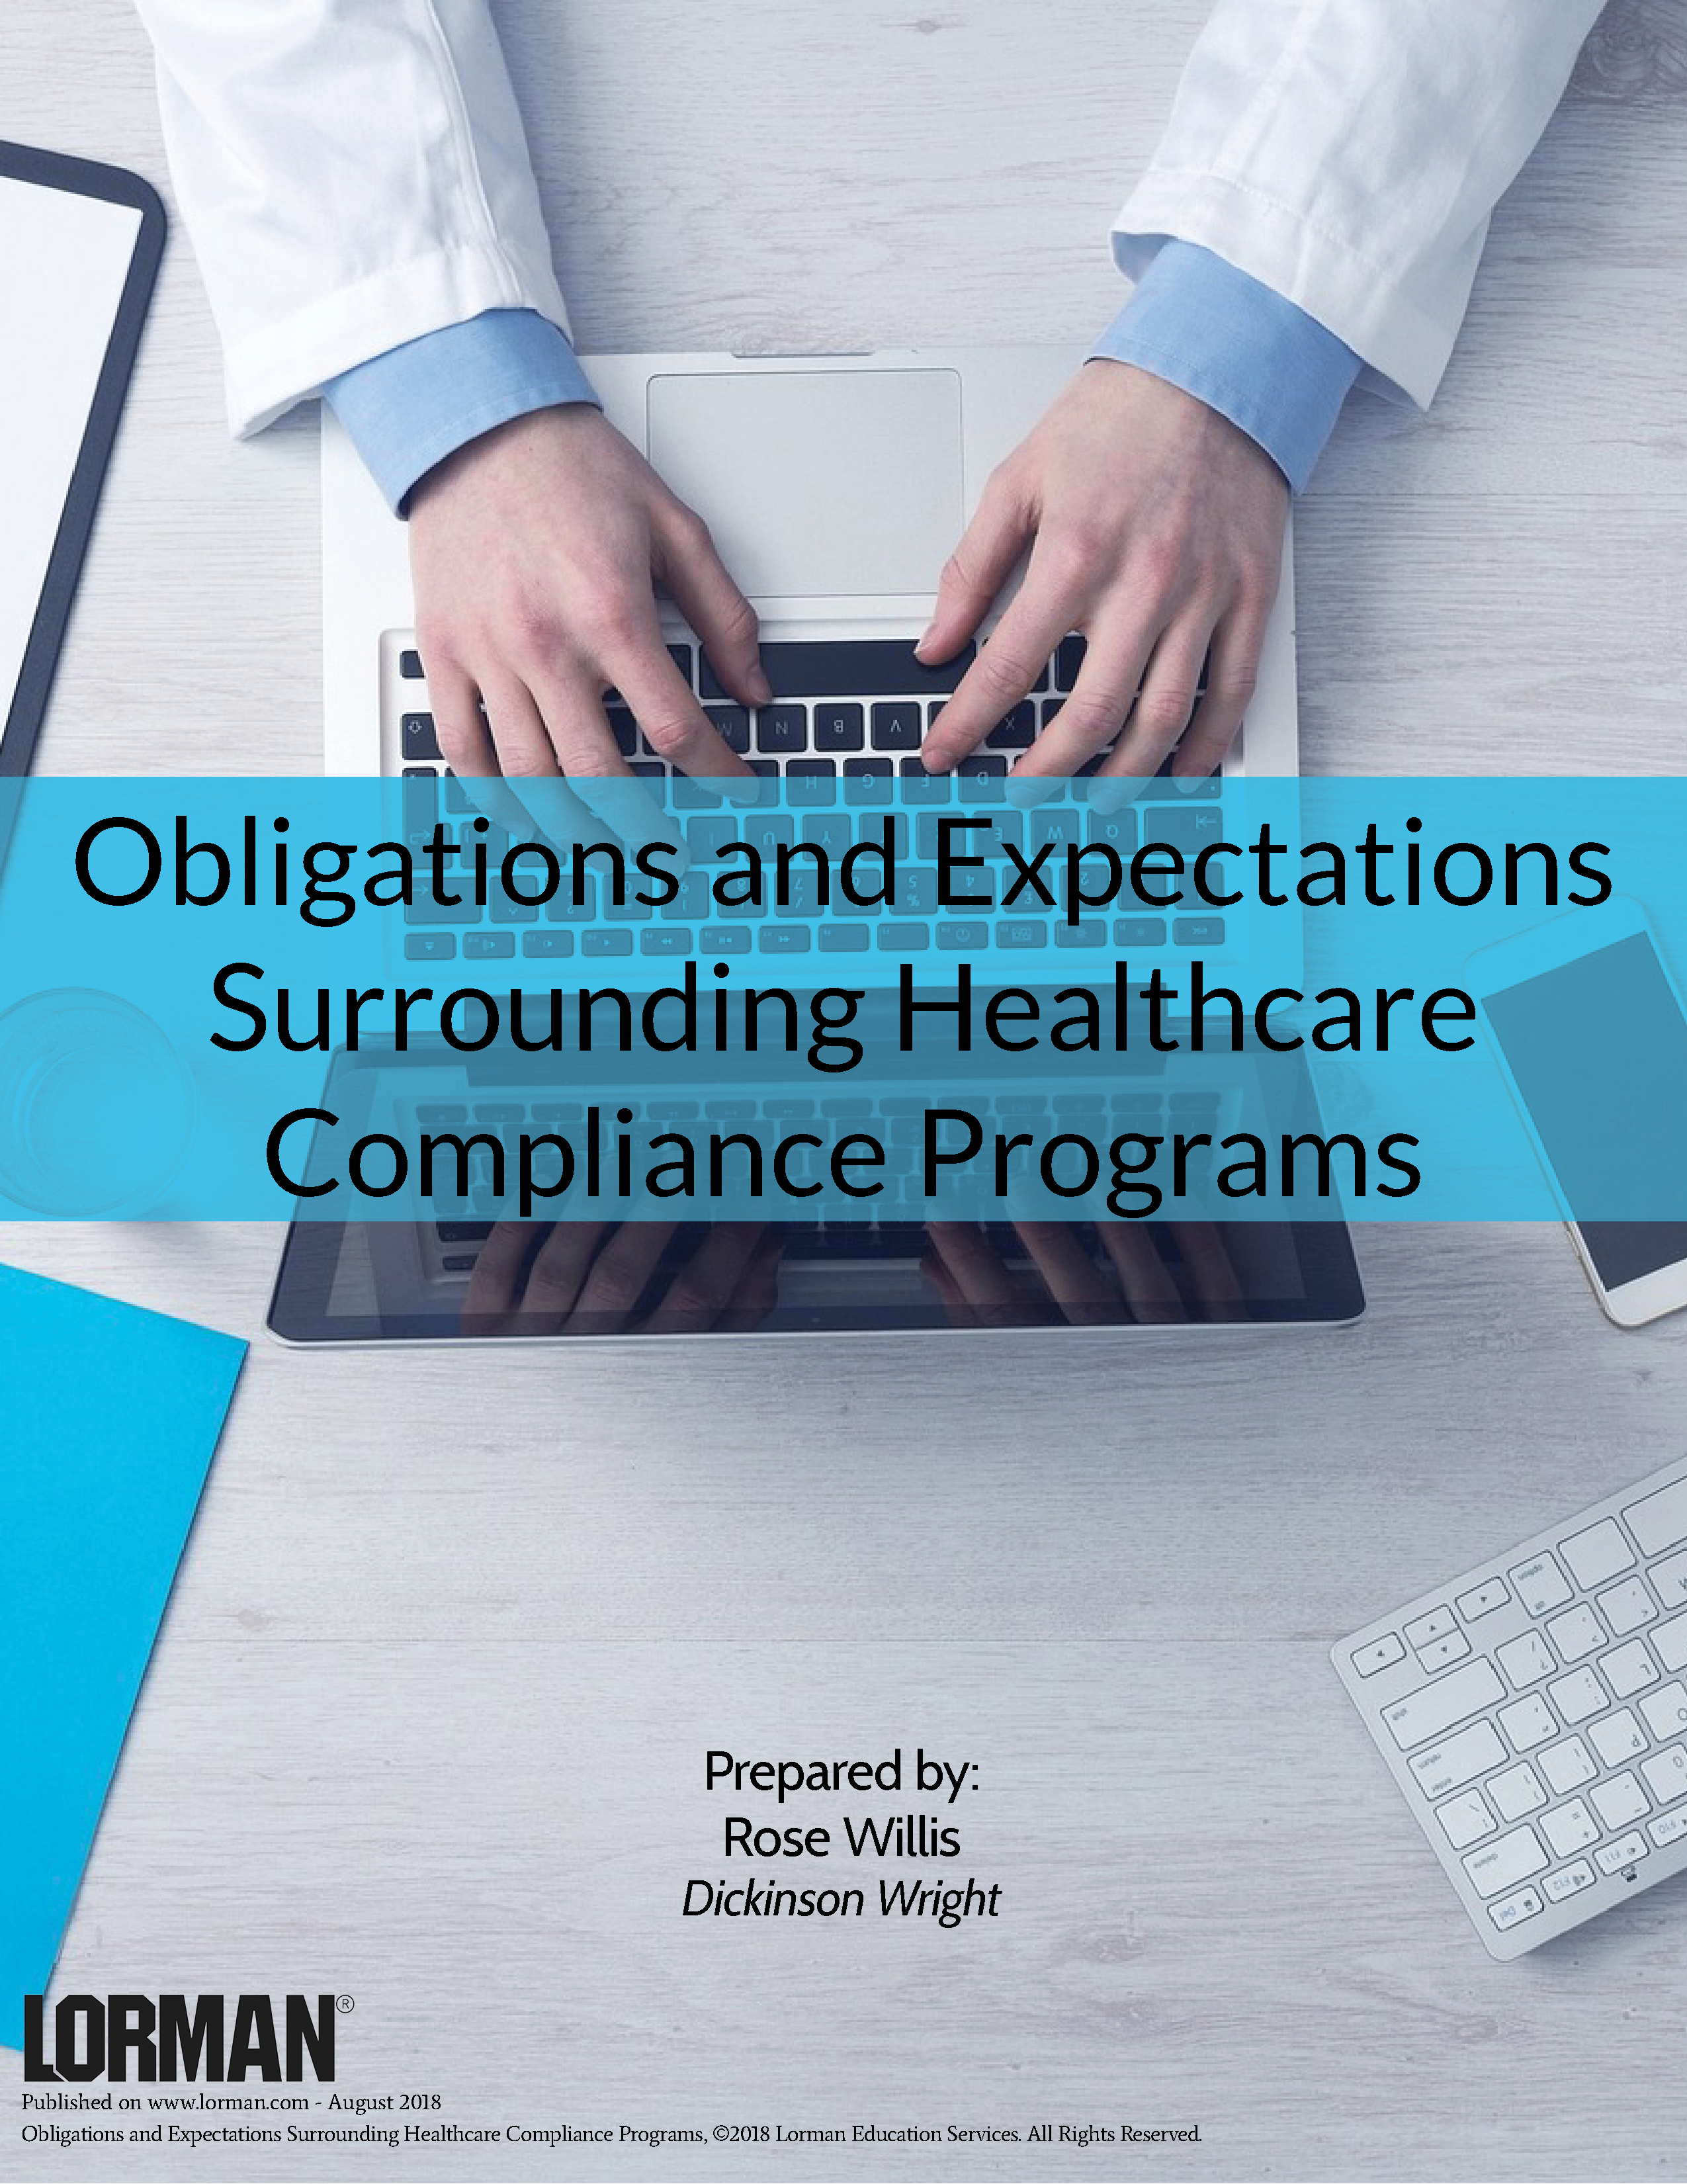 Obligations and Expectations Surrounding Healthcare Compliance Programs